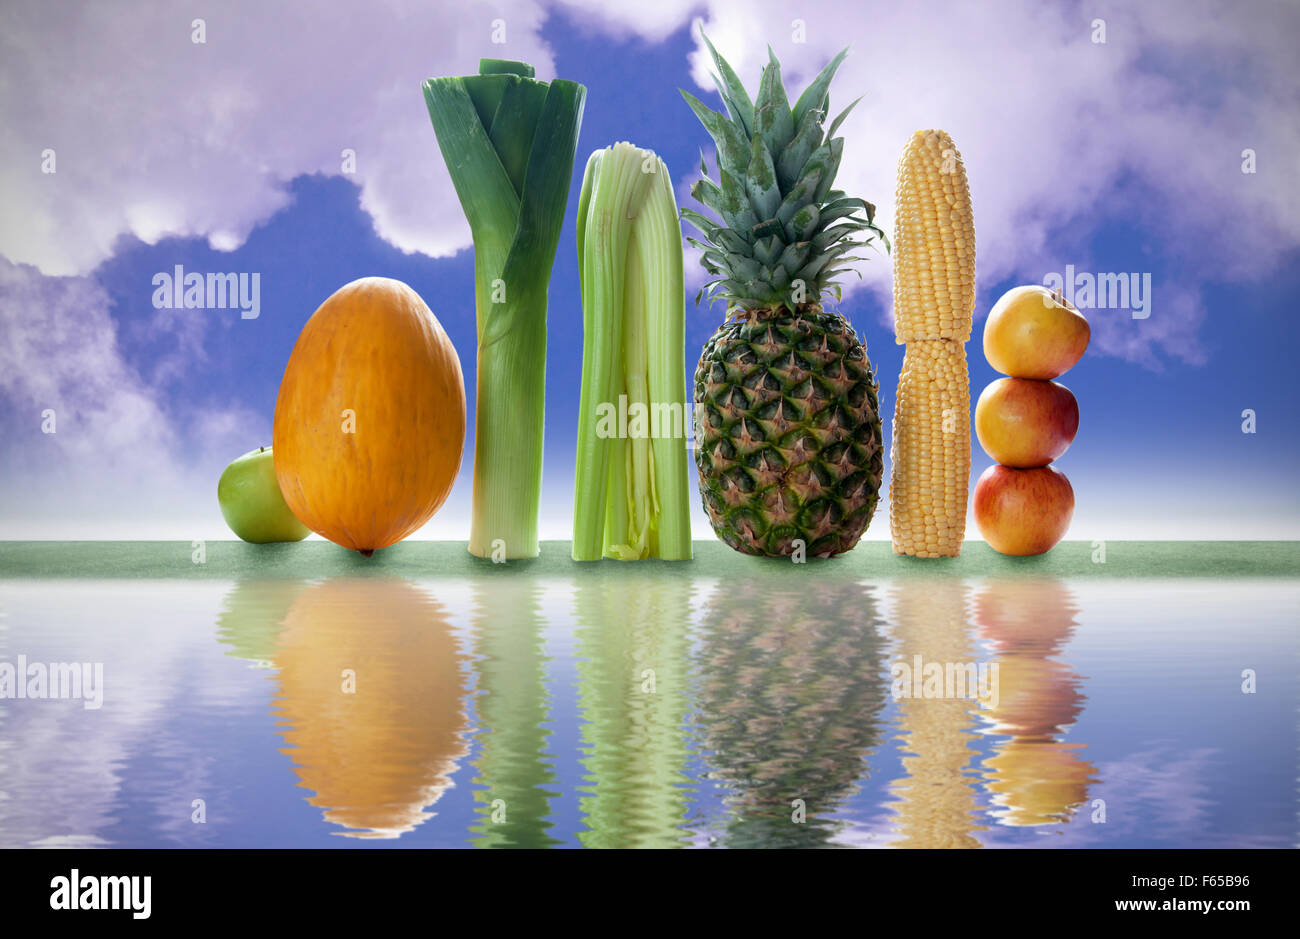 Fruit and vegetable concept Stock Photo